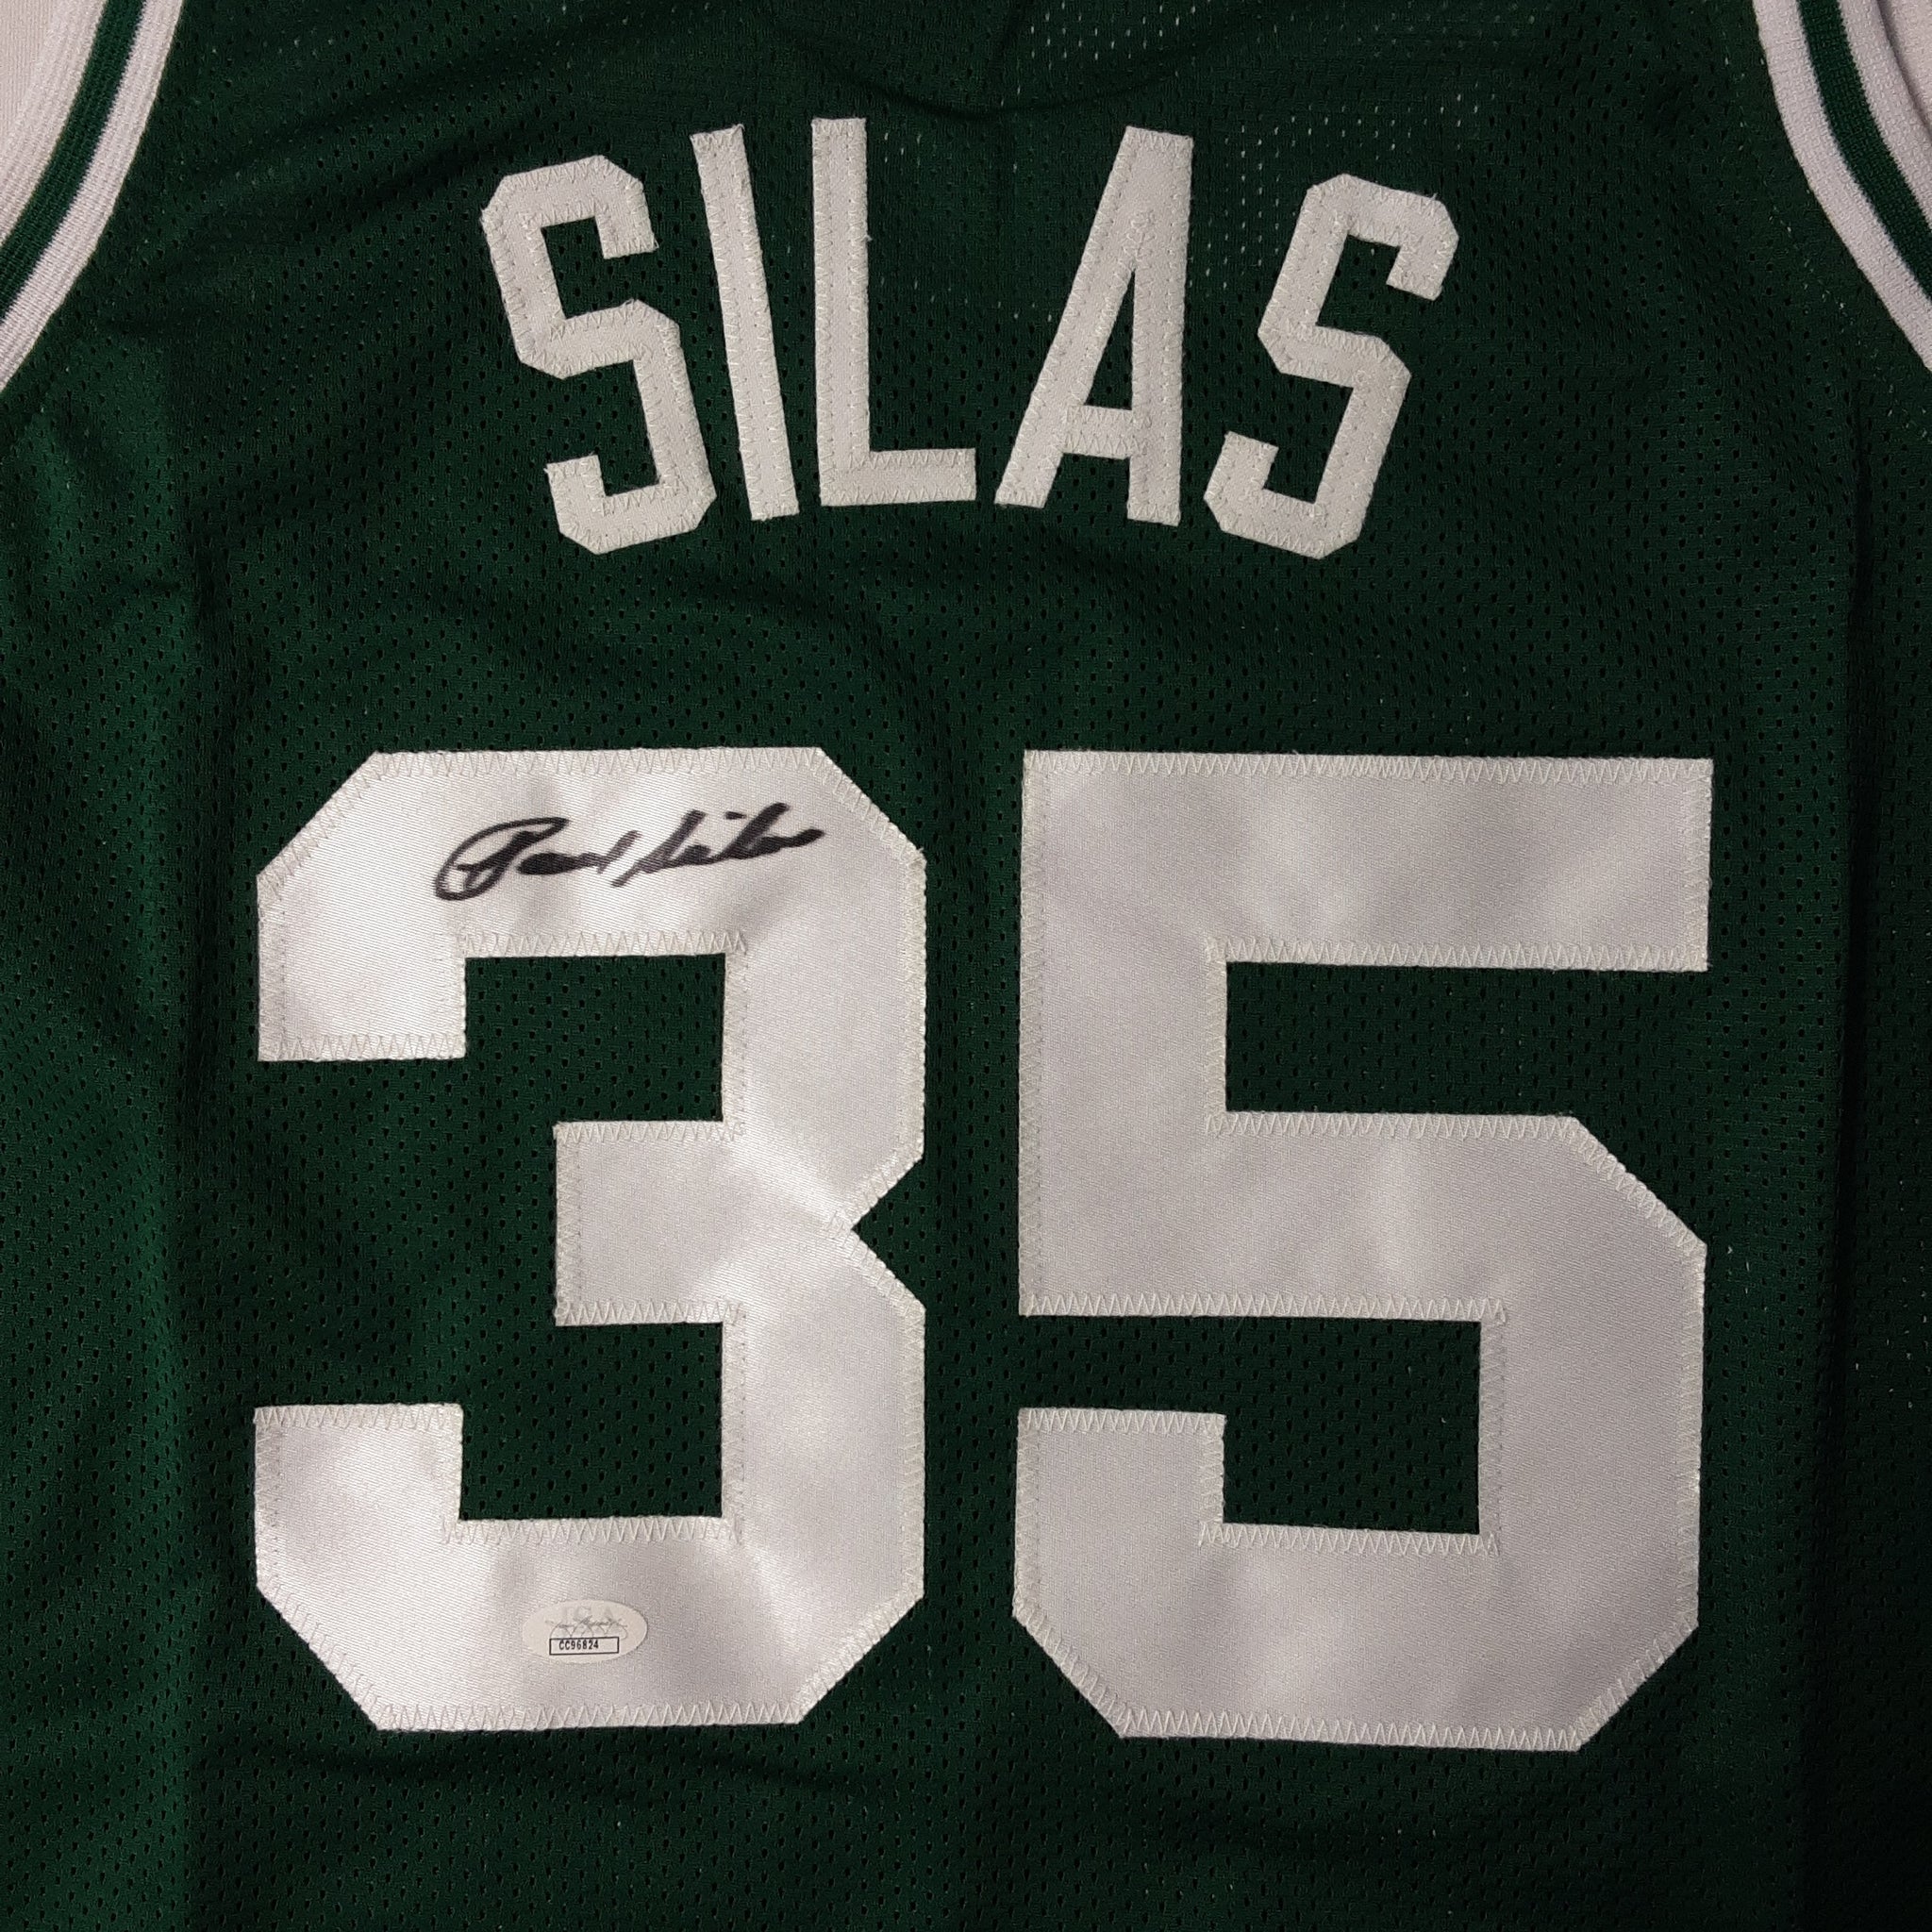 Paul Silas Authentic Signed Pro Style Jersey Autographed JSA-